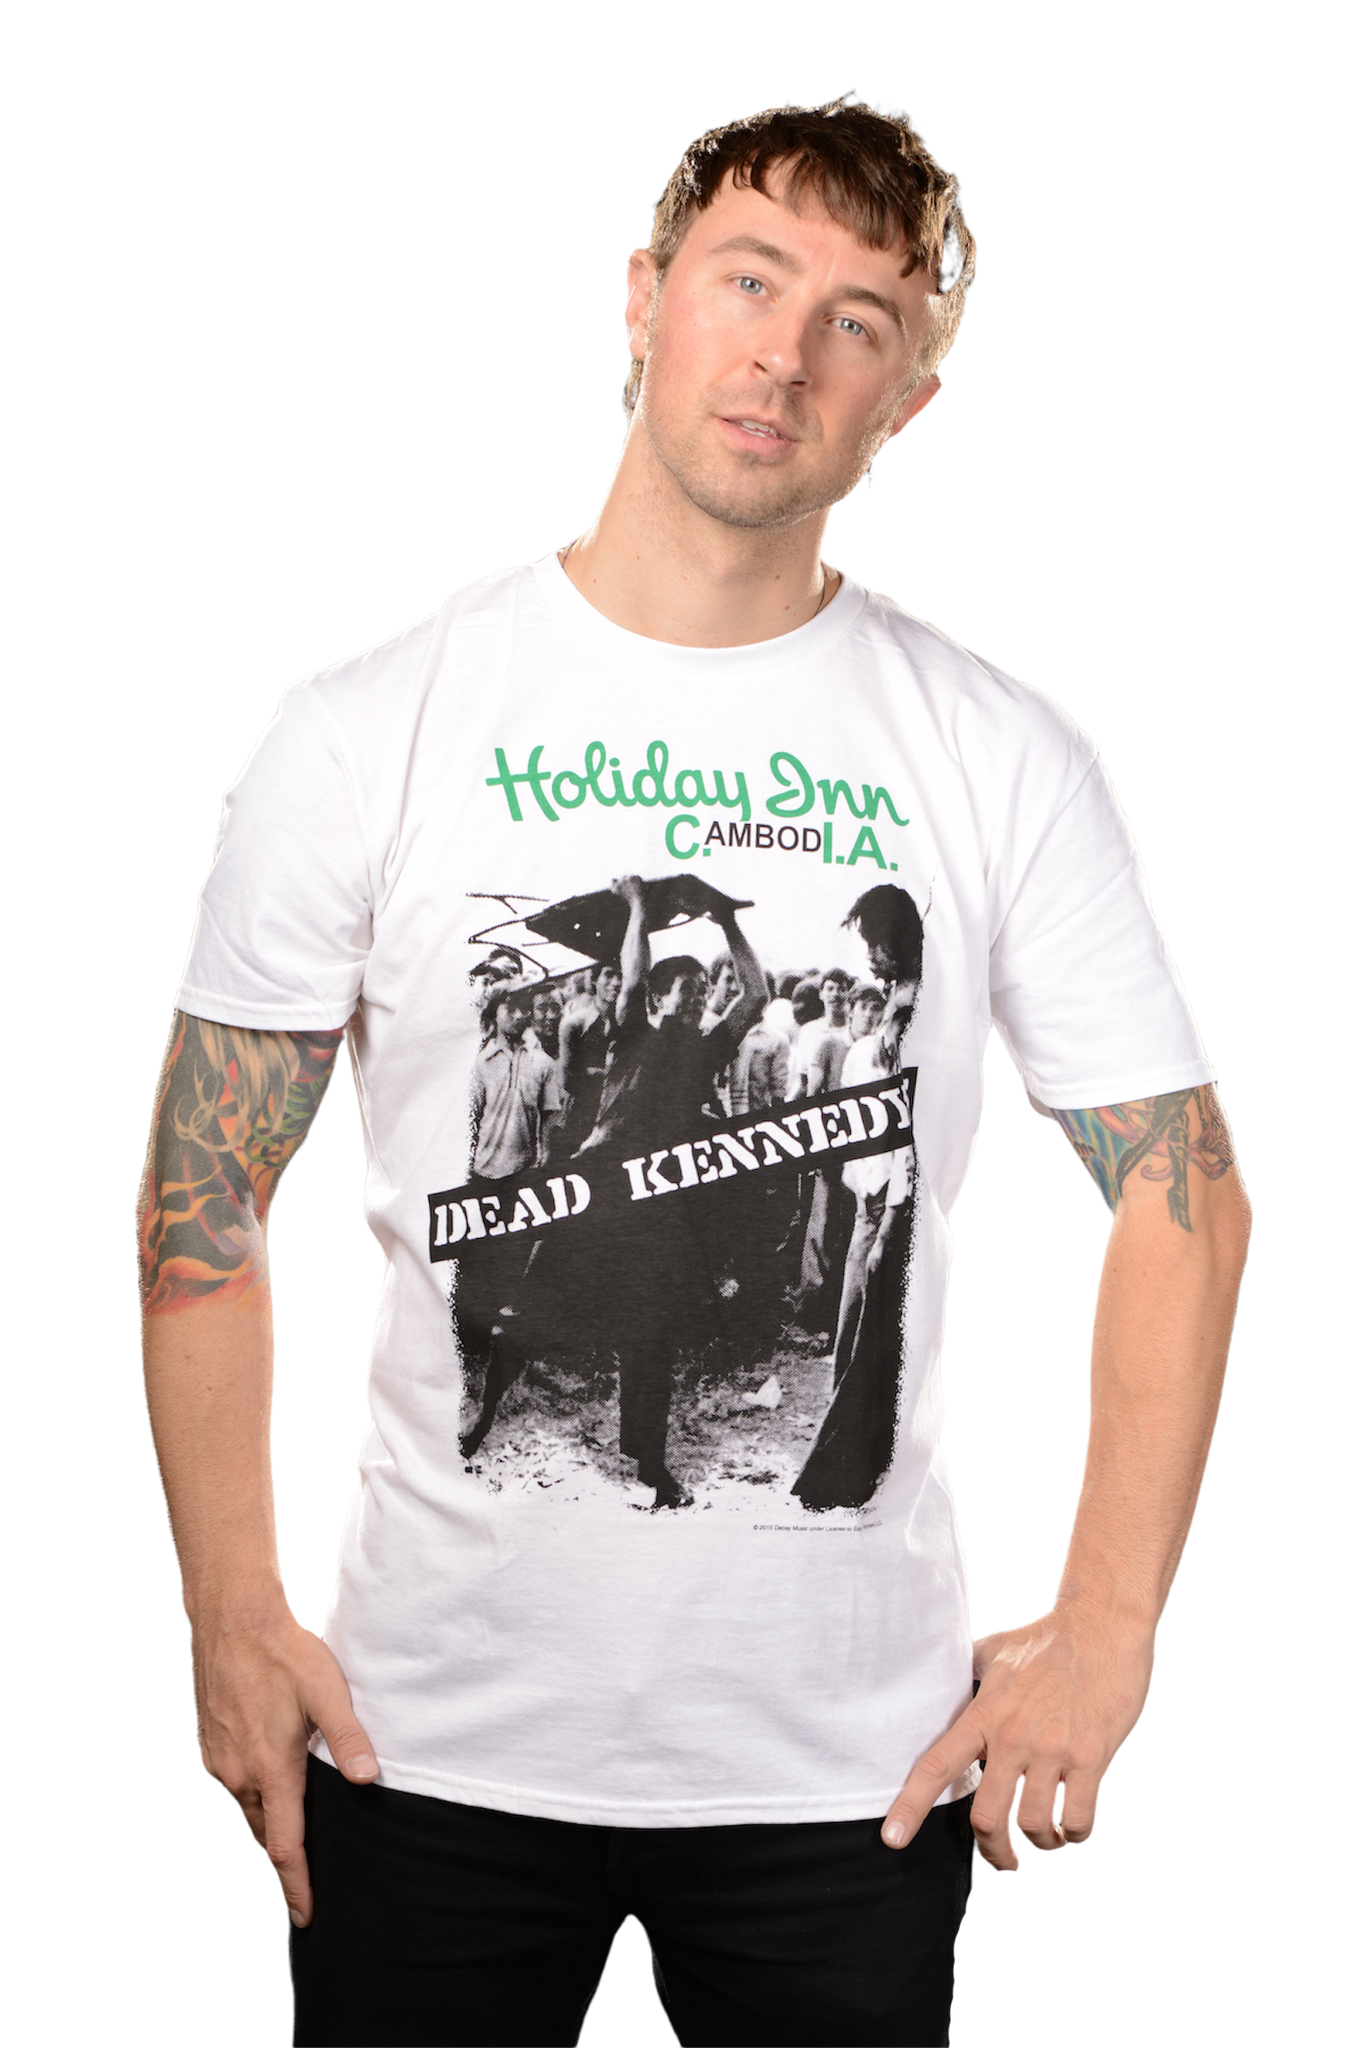 DEAD KENNEDYS: "HOLIDAY IN CAMBODIA" T-SHIRT